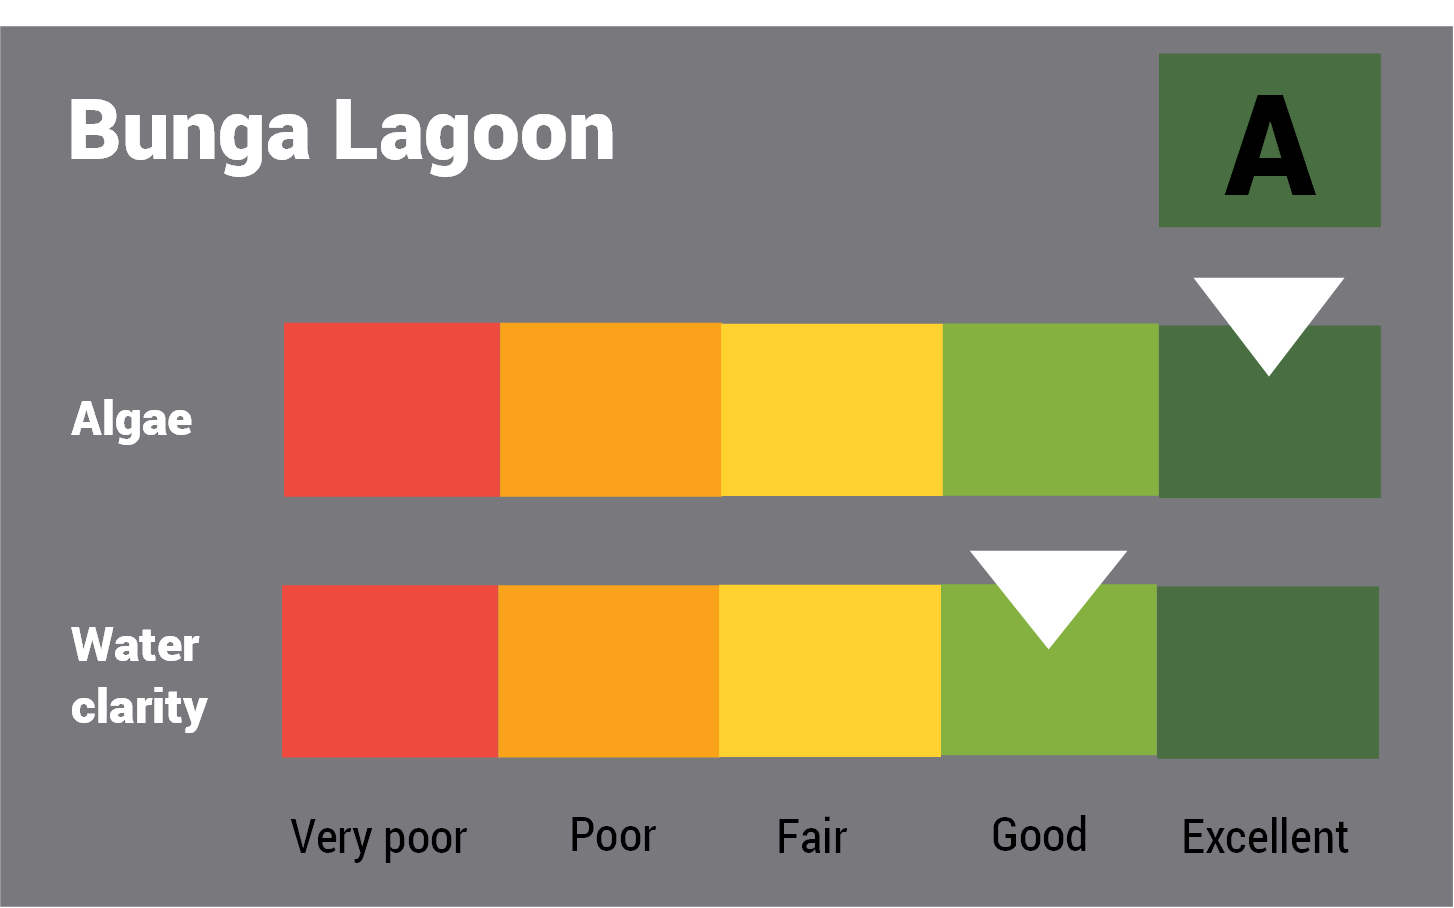 Bunga Lagoon water quality report card for algae and water clarity showing colour-coded ratings (red, orange, yellow, light green and dark green, which represent very poor, poor, fair, good and excellent, respectively). Algae is rated 'excellent' and water clarity is rated 'excellent' giving an overall rating of 'excellent' or 'A'.